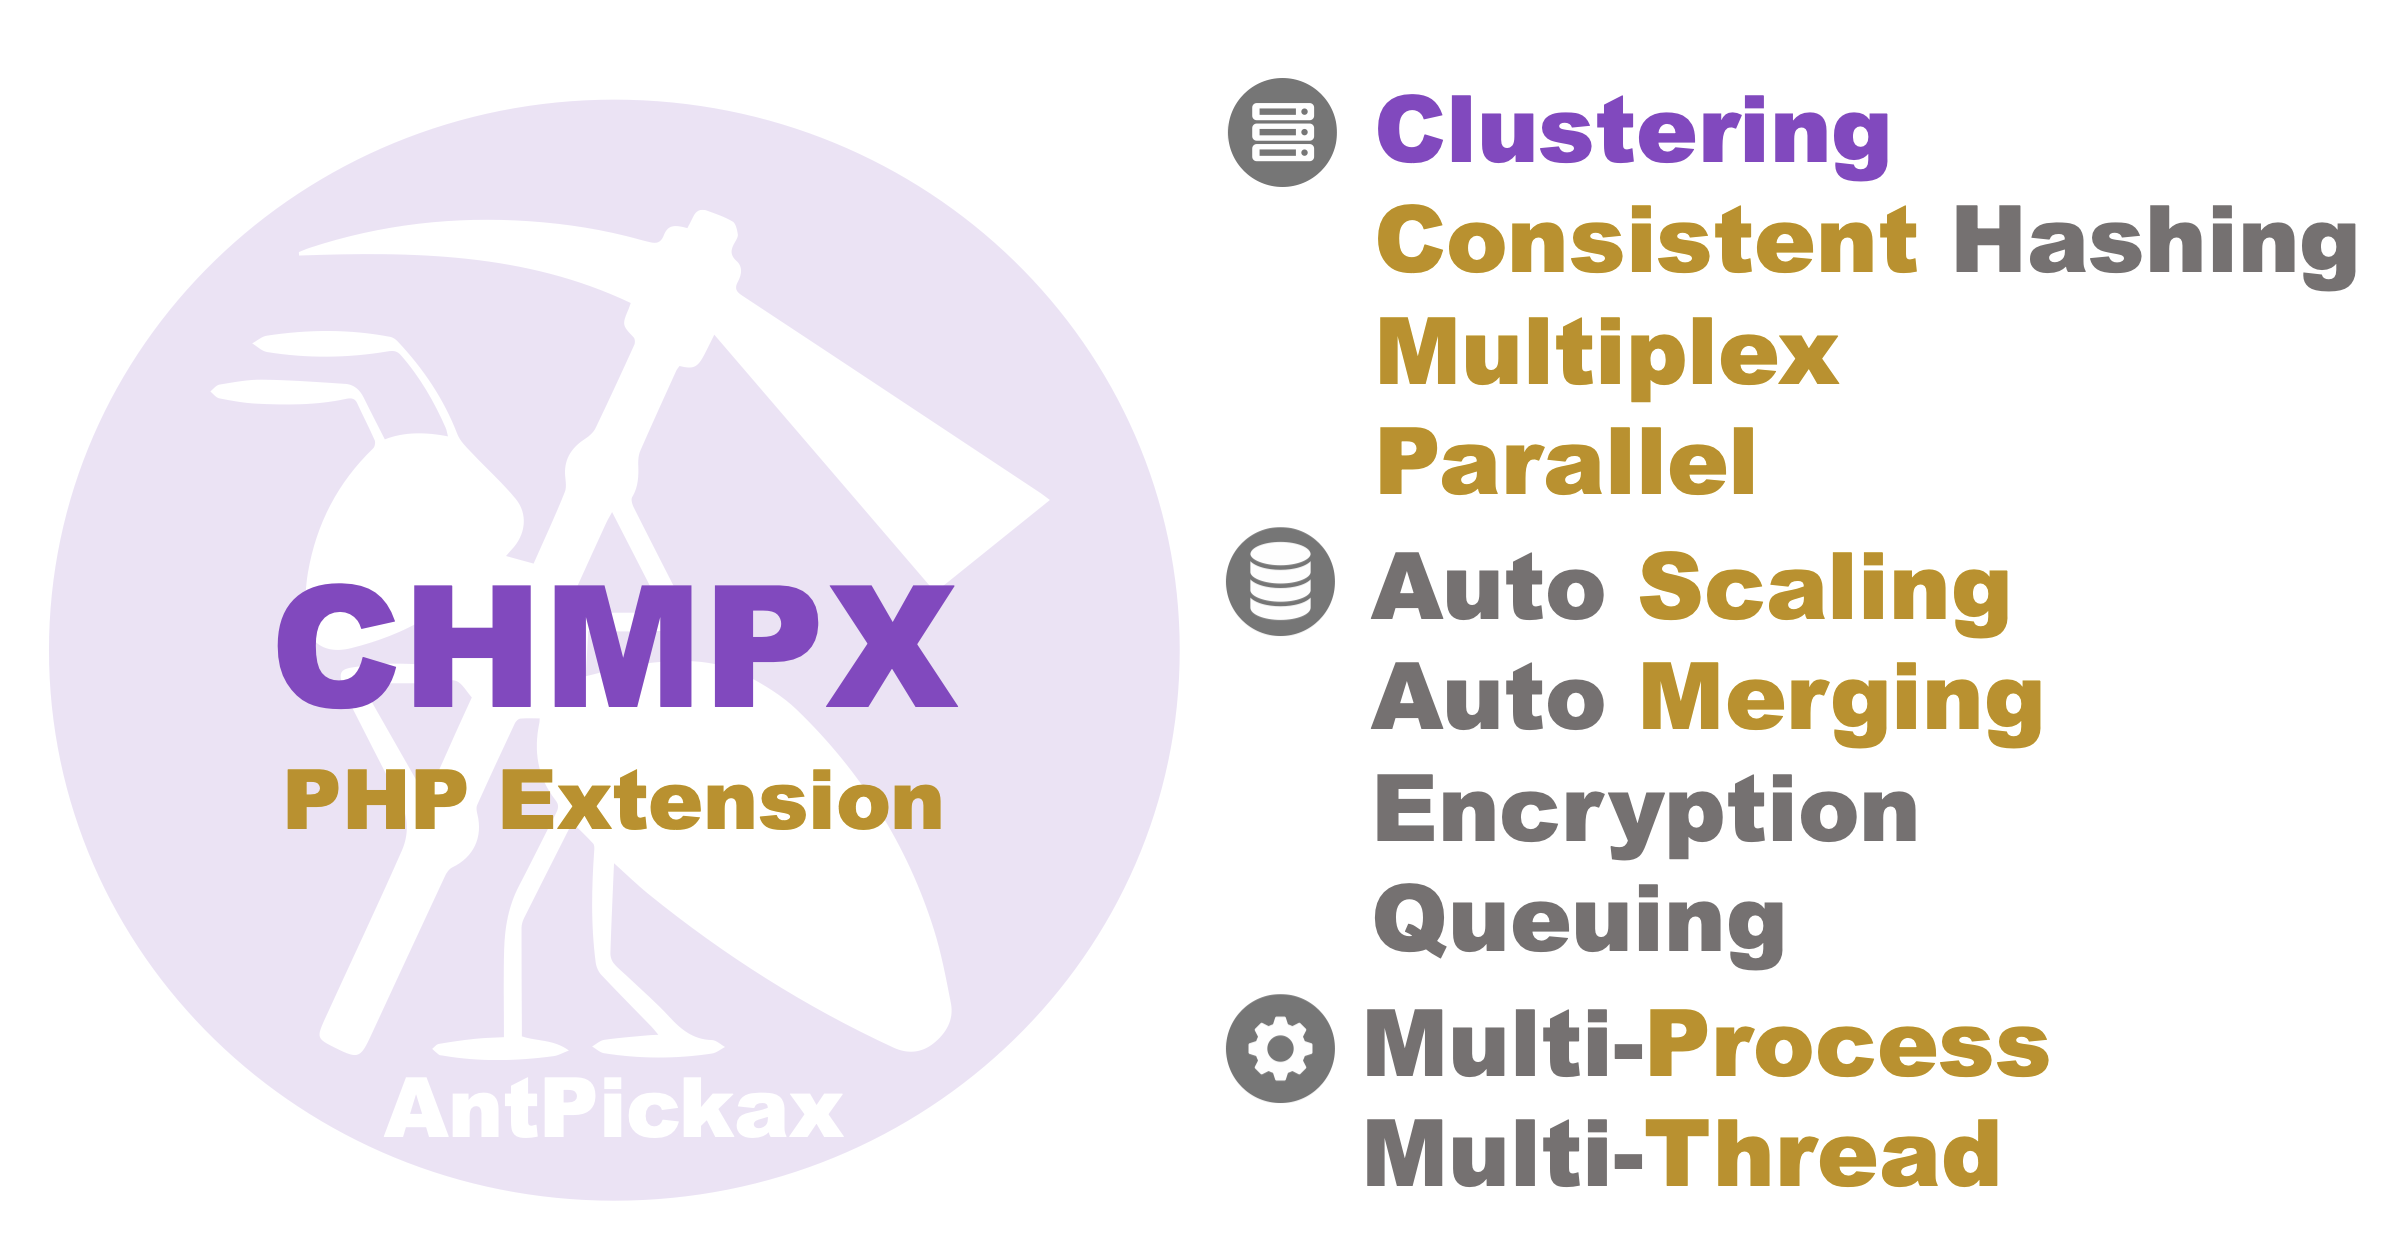 CHMPX PHP Extension